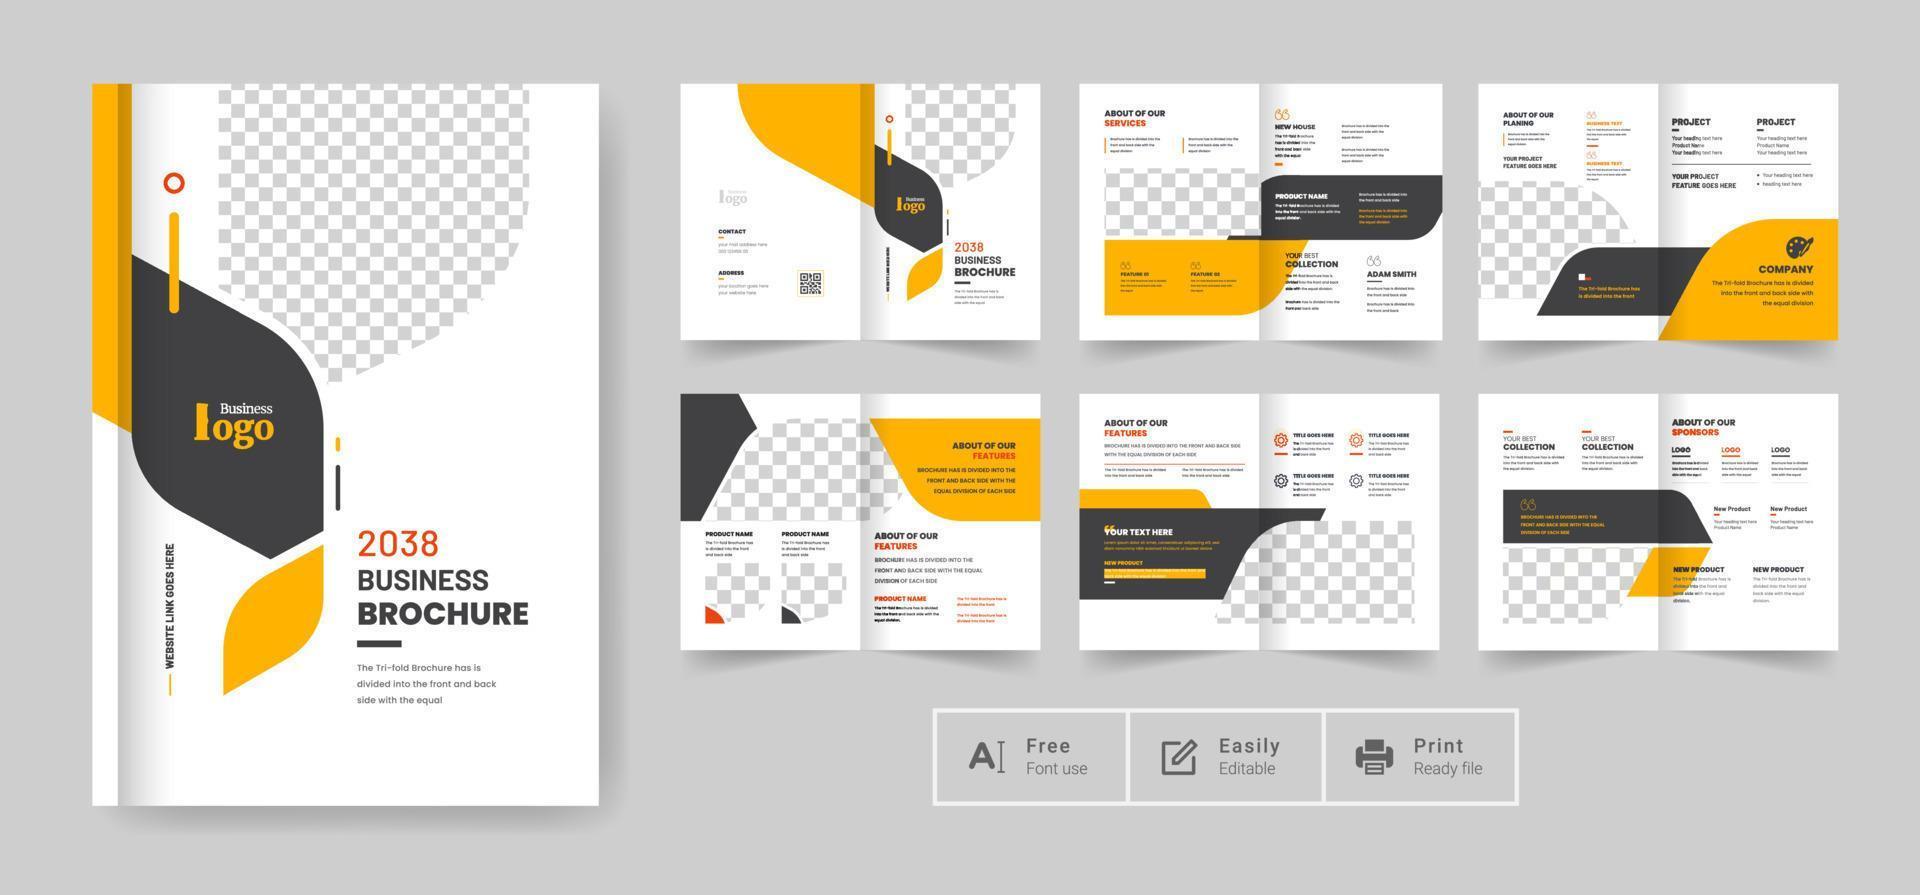 16 pages business brochure design template free vector